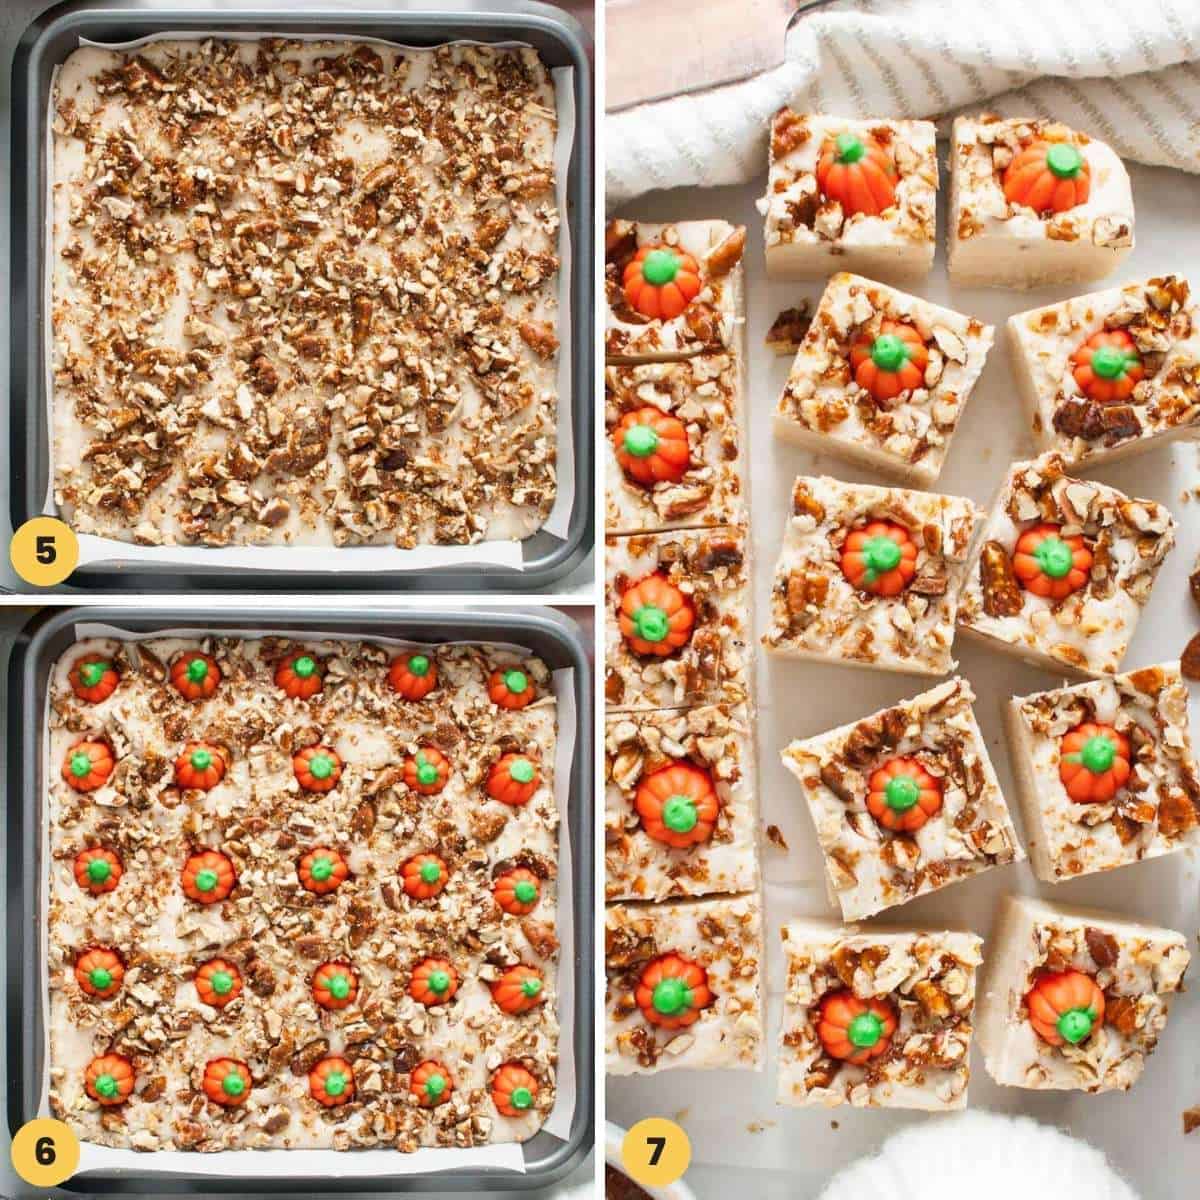 Collage of 3 images showing how to decorate fudge and cut it into squares